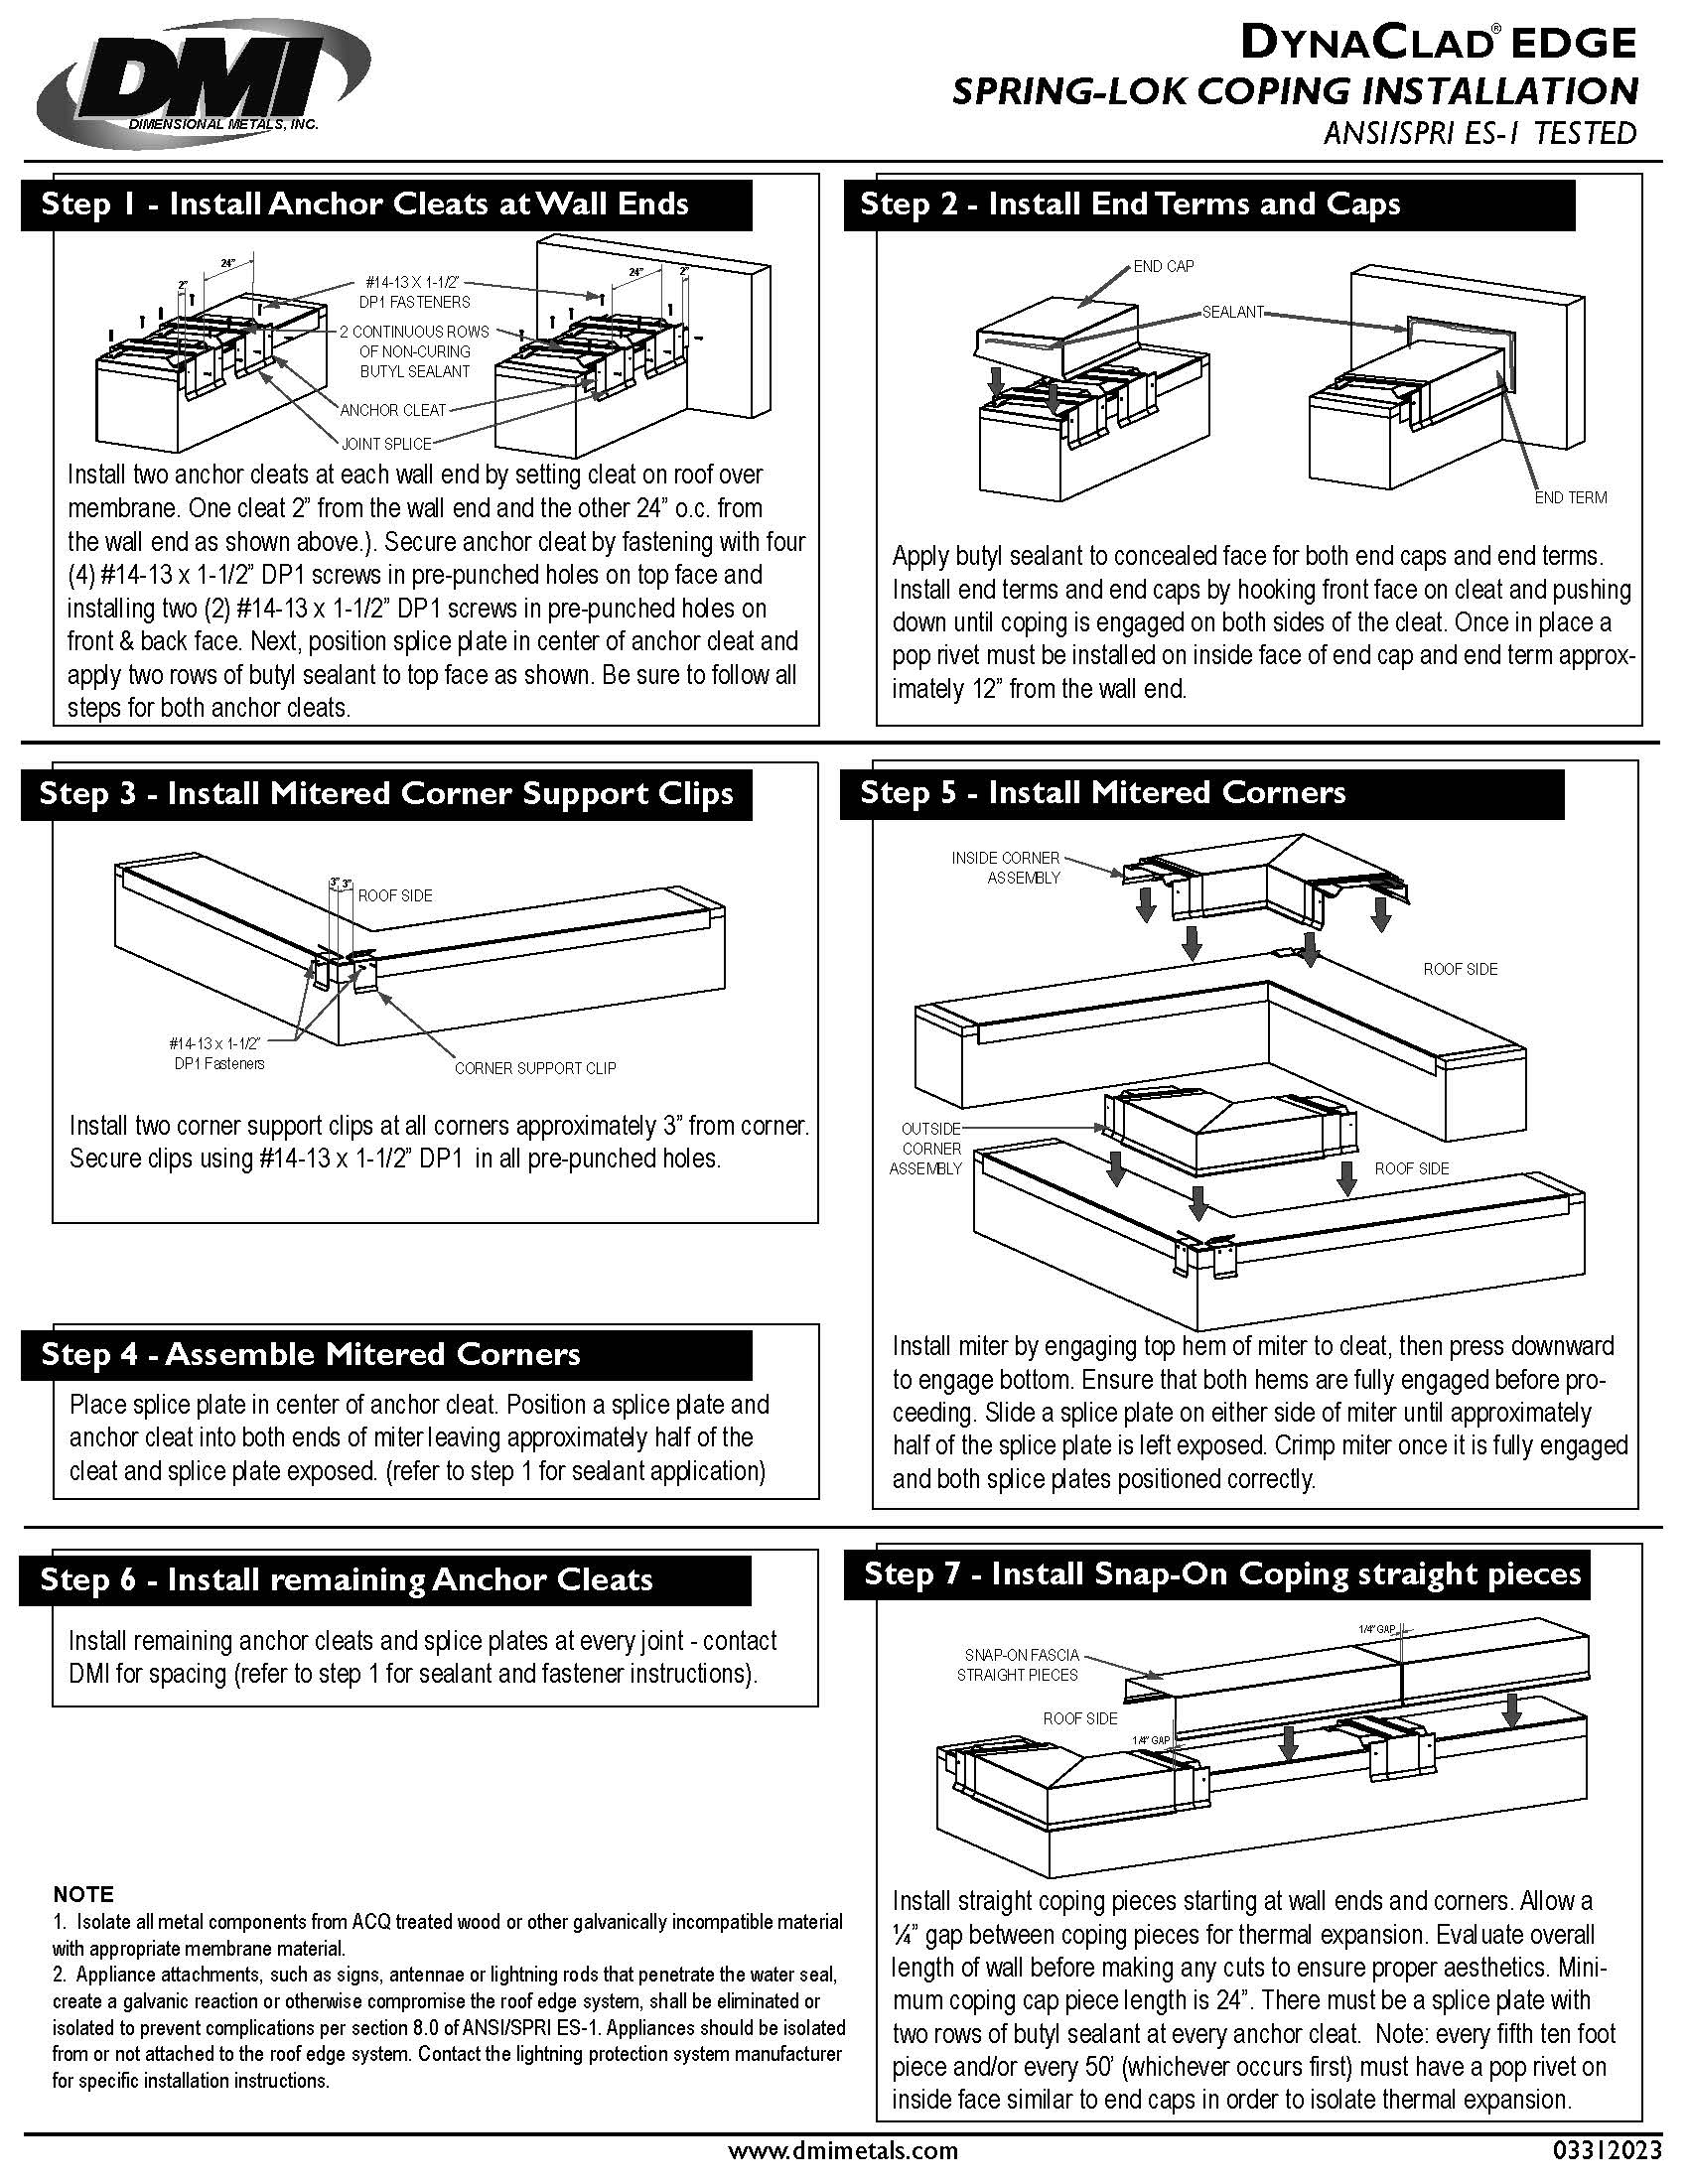 Snap-On Coping Installation Guide